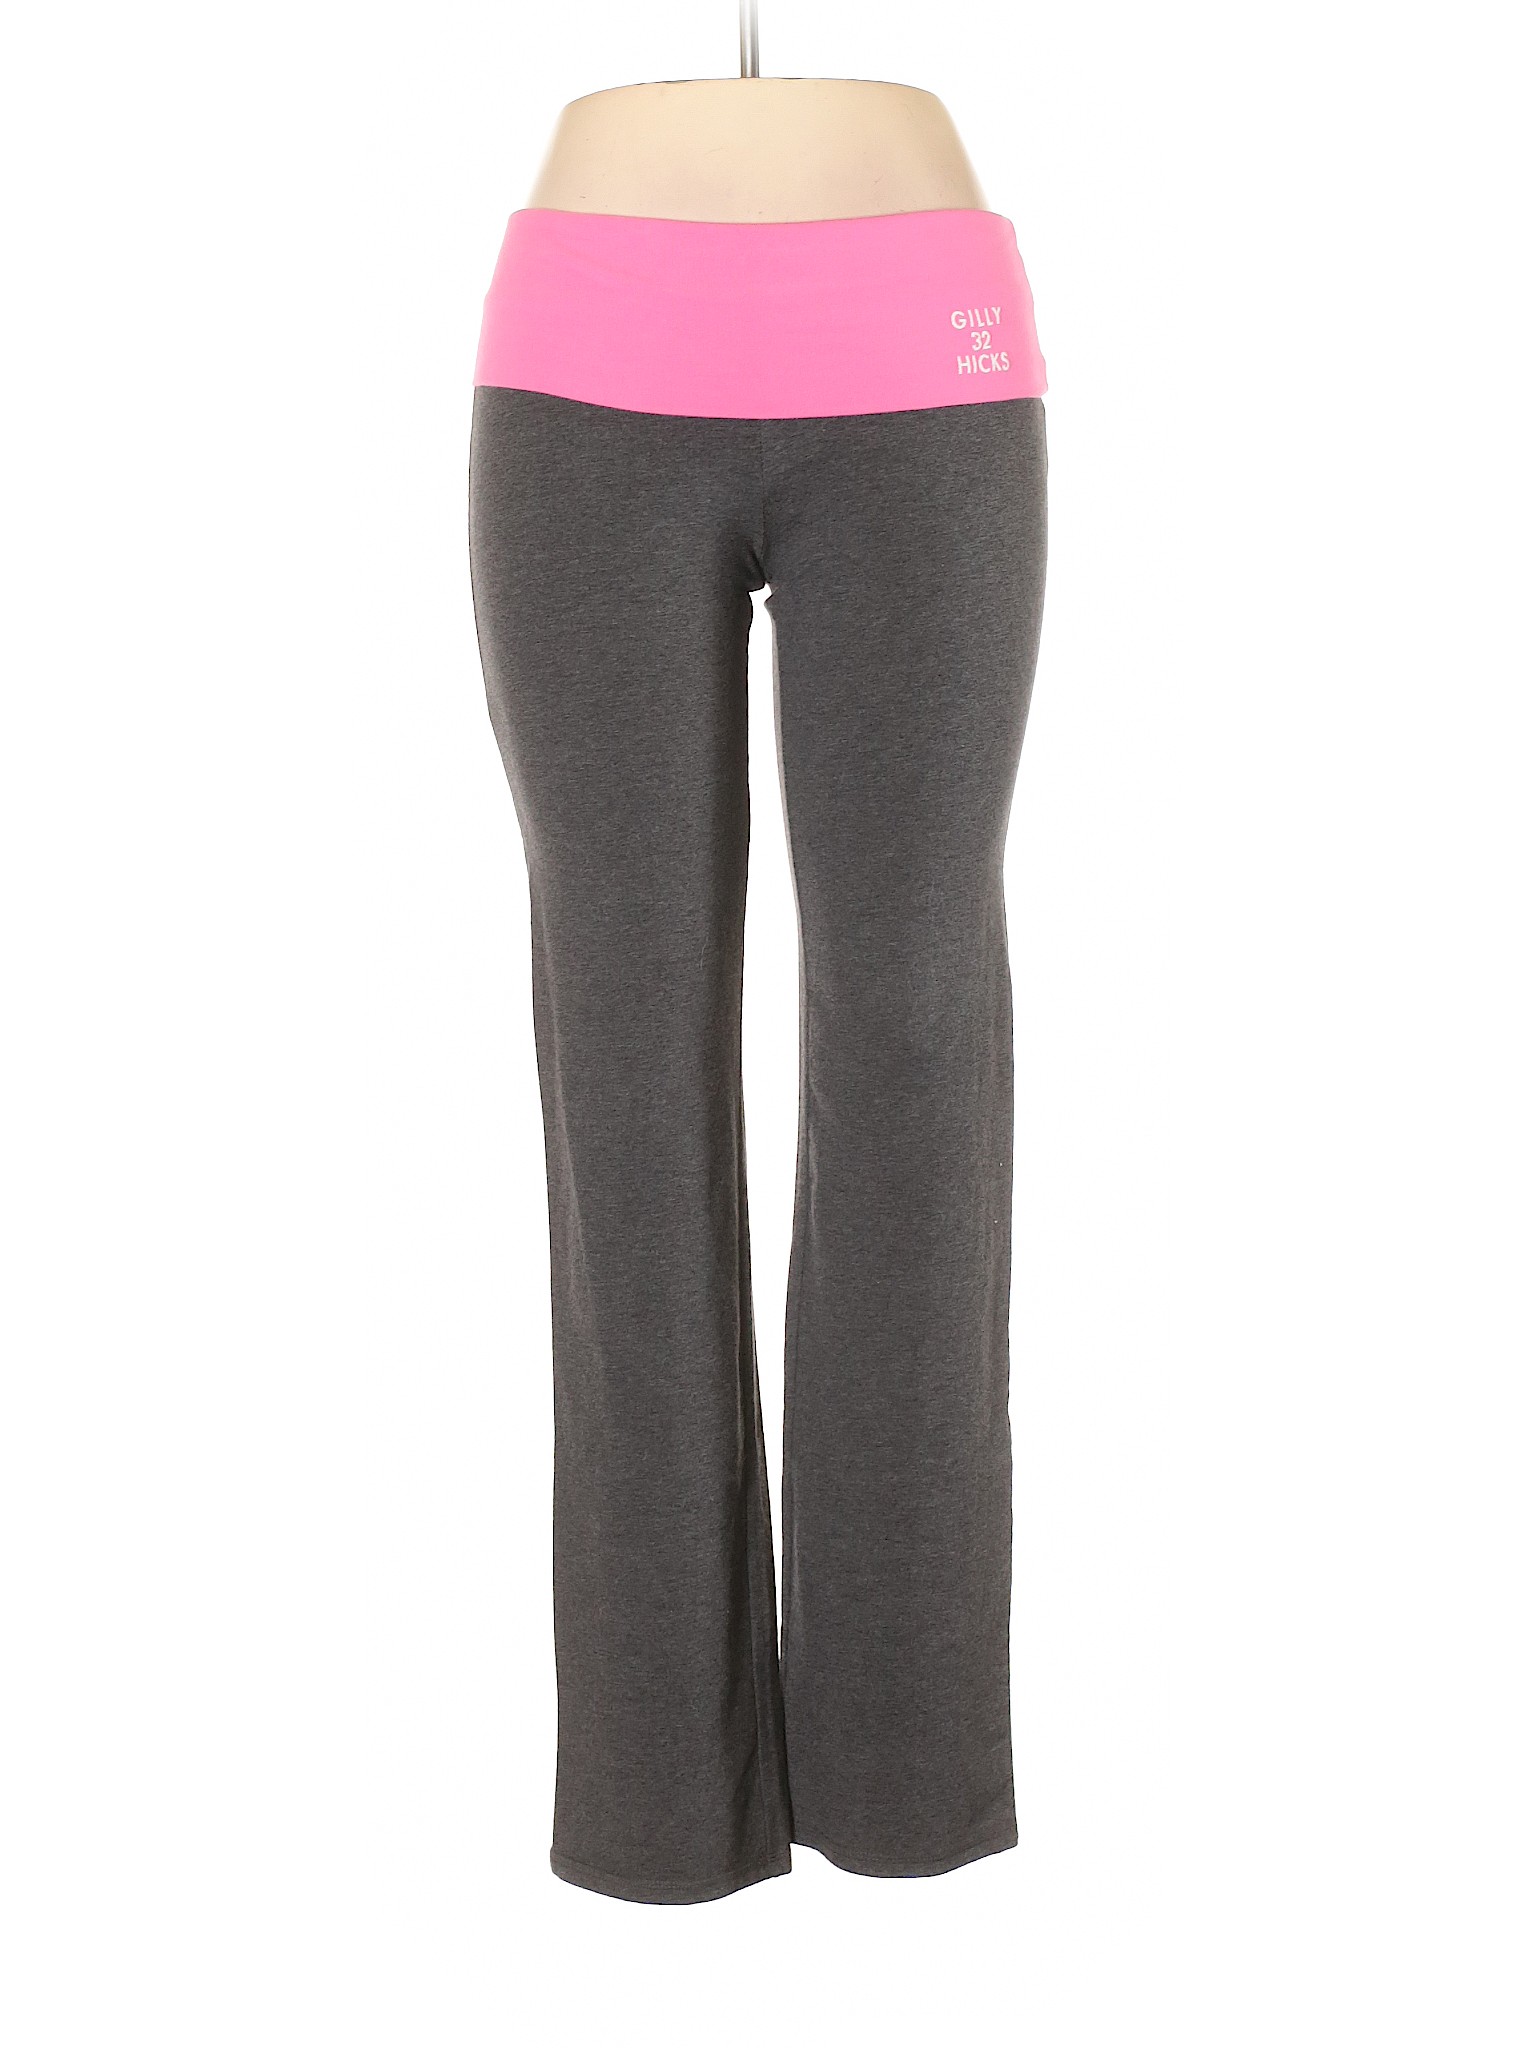 Gilly Hicks Color Block Pink Yoga Pants Size L - 38% off